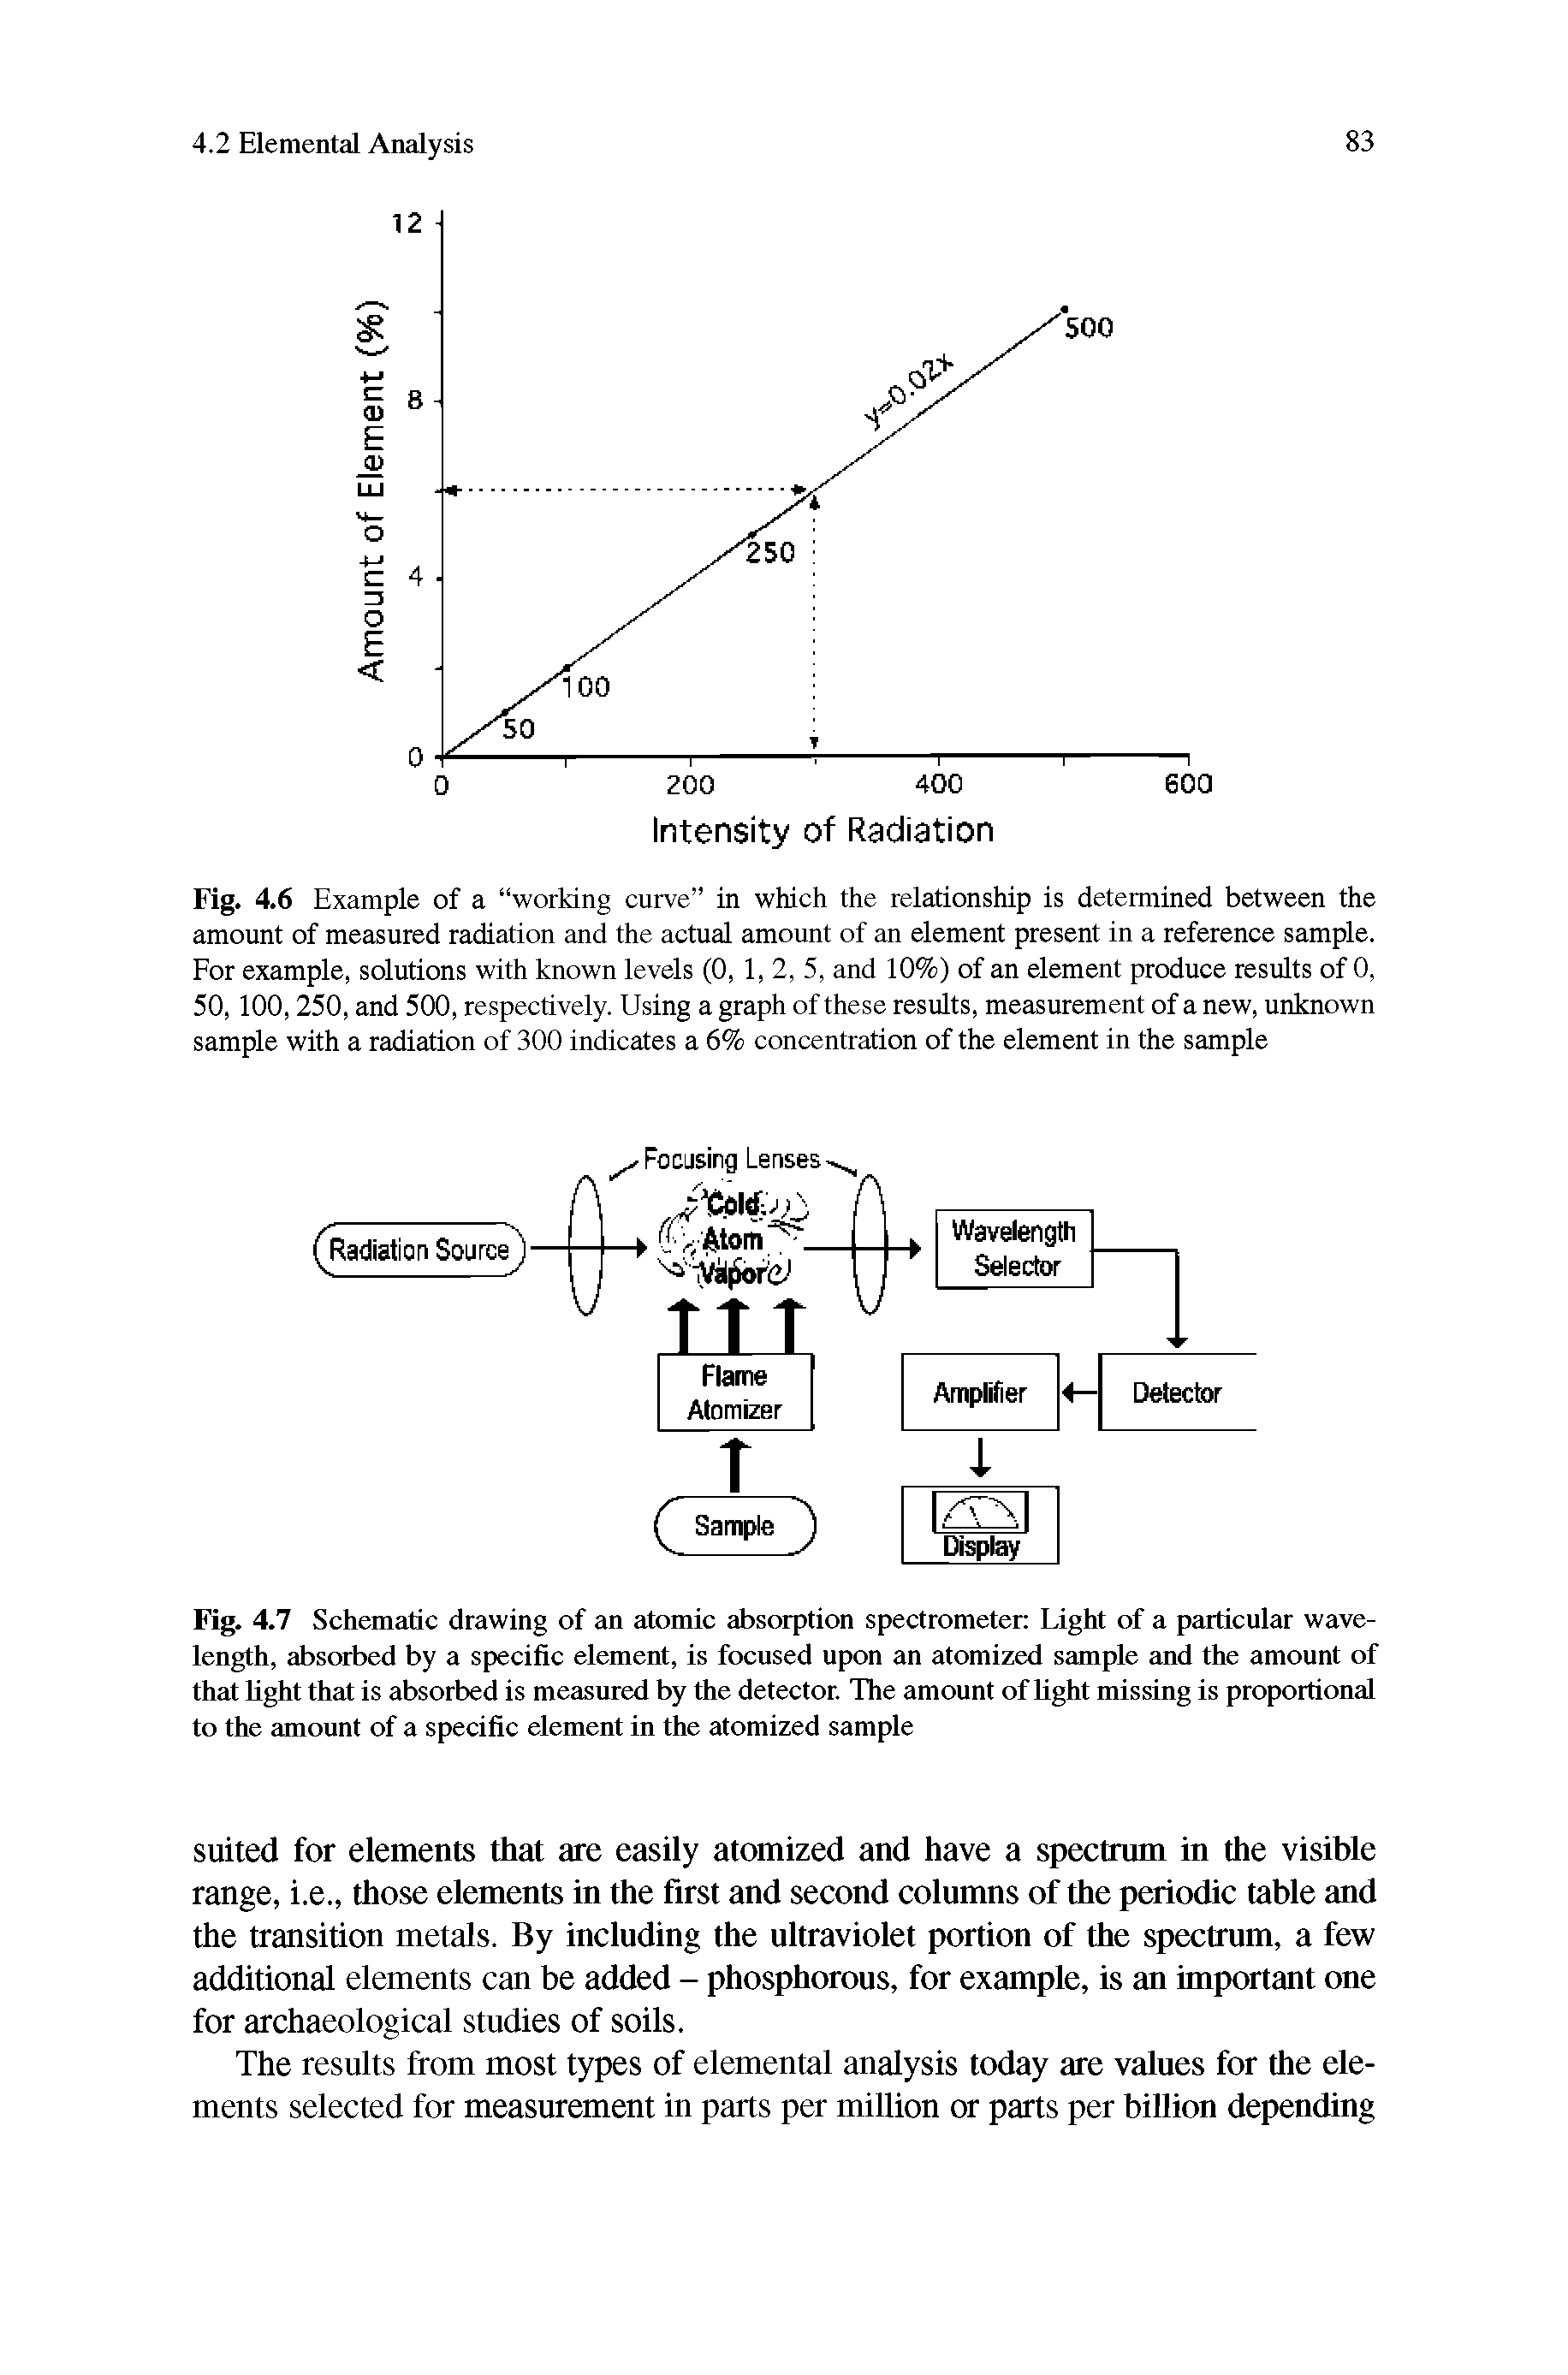 Fig. 4.7 Schematic drawing of an atomic absorption spectrometer Light of a particular wavelength, absorbed by a specific element, is focused upon an atomized sample and the amount of that light that is absorbed is measured by the detector. The amount of light missing is proportional to the amount of a specific element in the atomized sample...